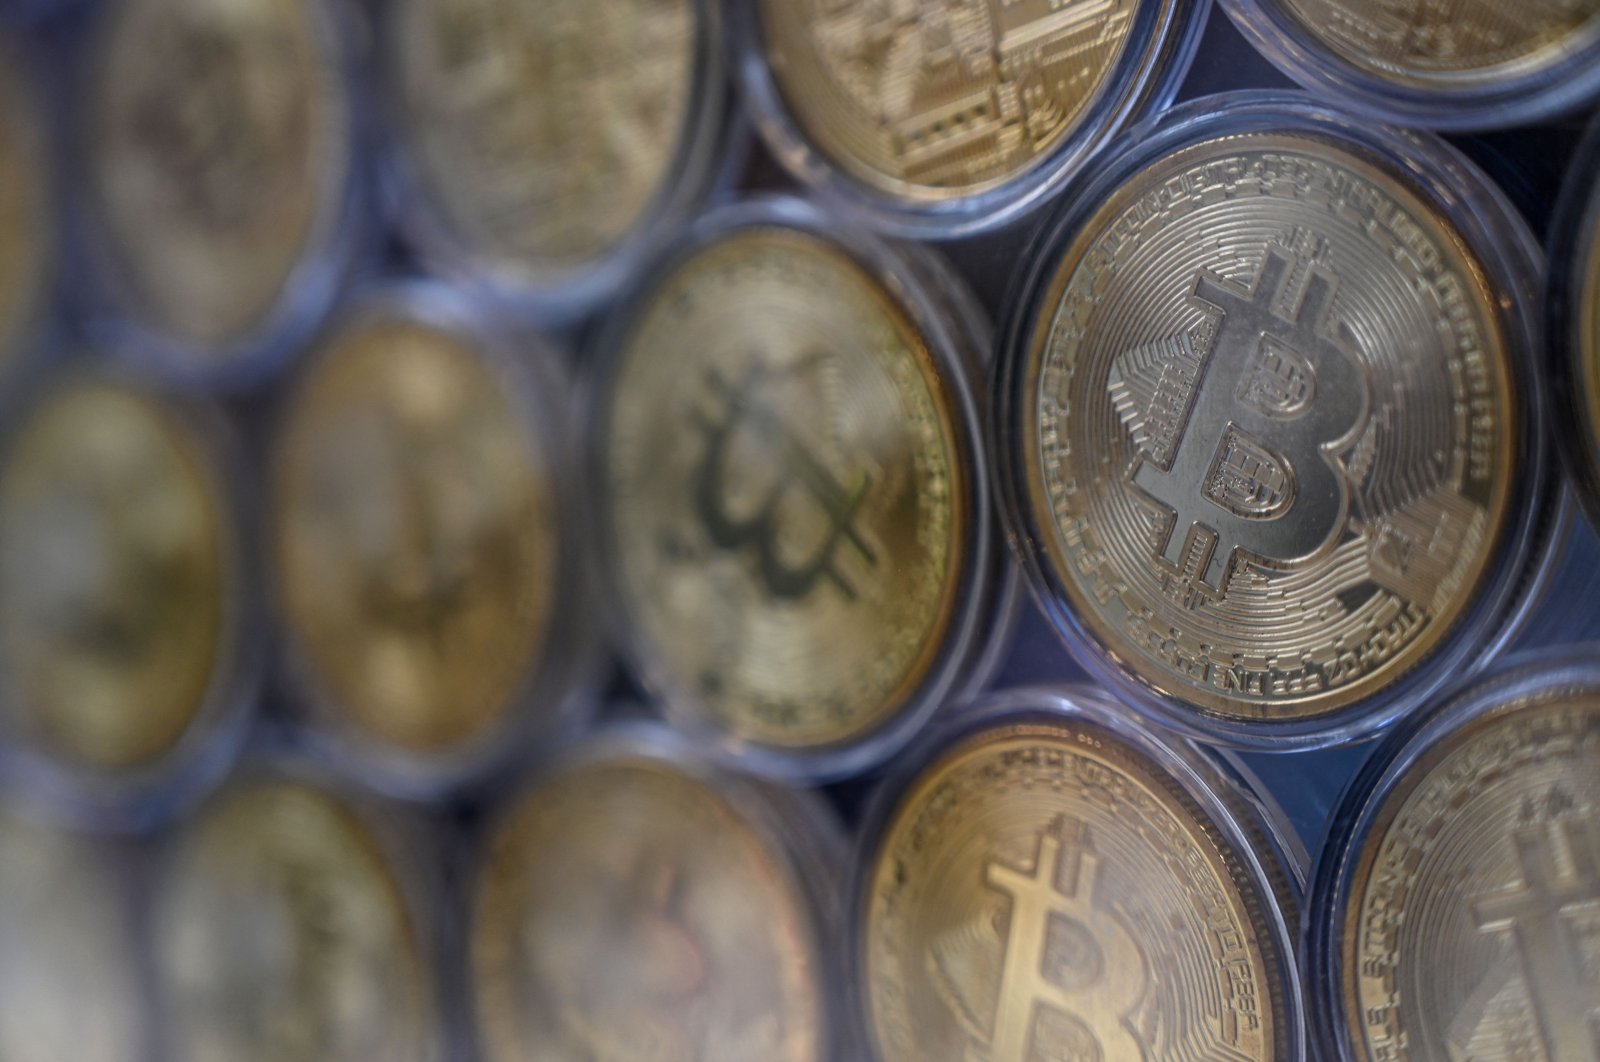 Physical imitations of Bitcoins are pictured at a cryptocurrency exchange branch near the Grand Bazaar in Istanbul, Turkey, Oct. 20, 2021. (AFP Photo)